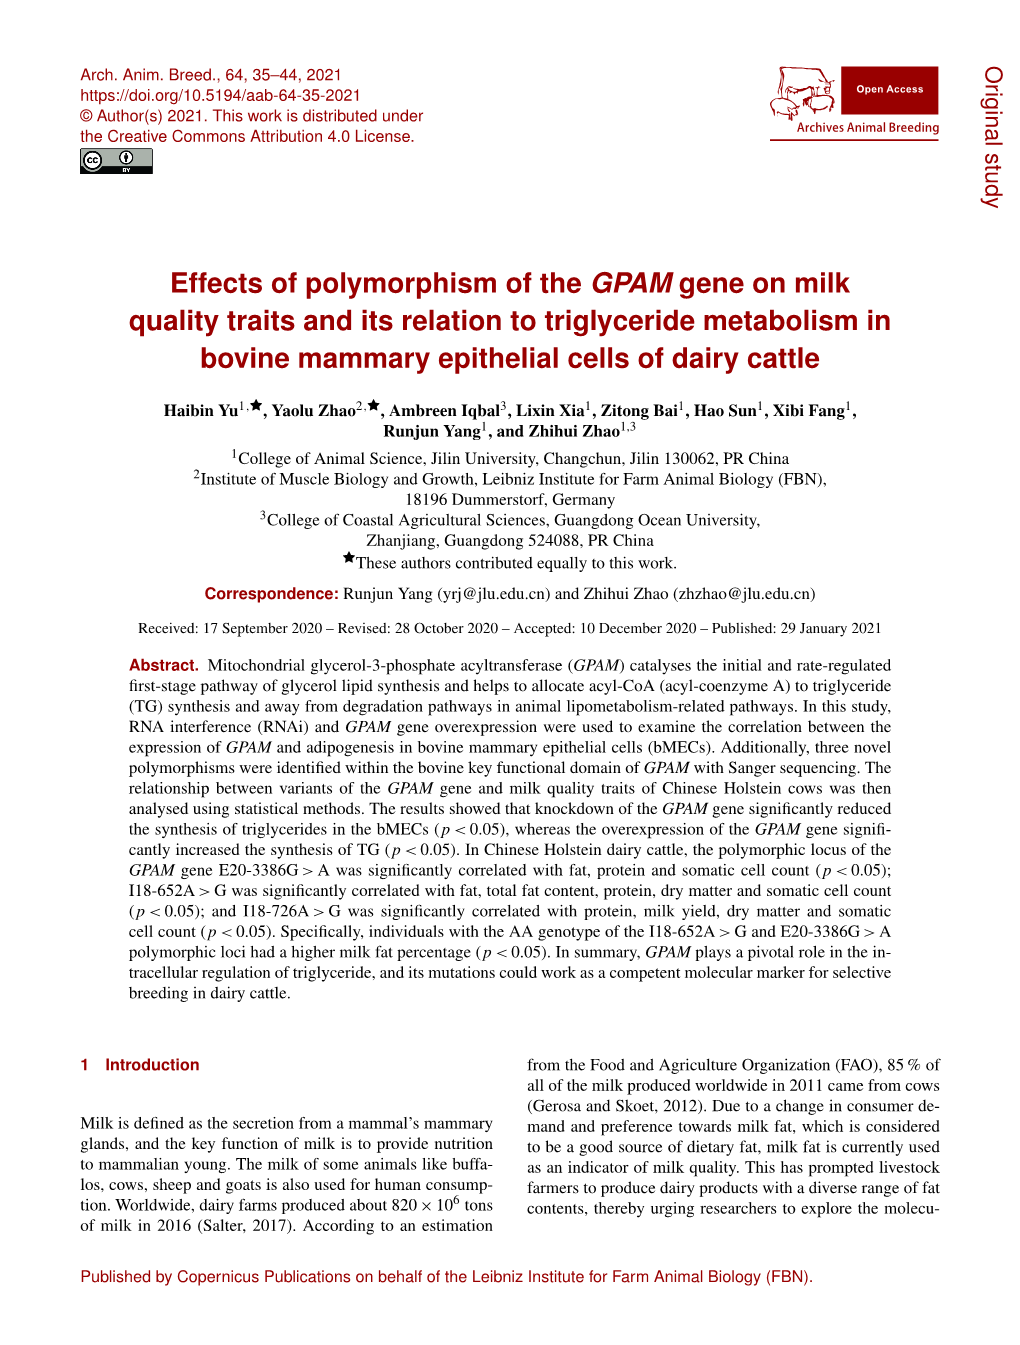 Effects of Polymorphism of the GPAM Gene on Milk Quality Traits and Its Relation to Triglyceride Metabolism in Bovine Mammary Epithelial Cells of Dairy Cattle